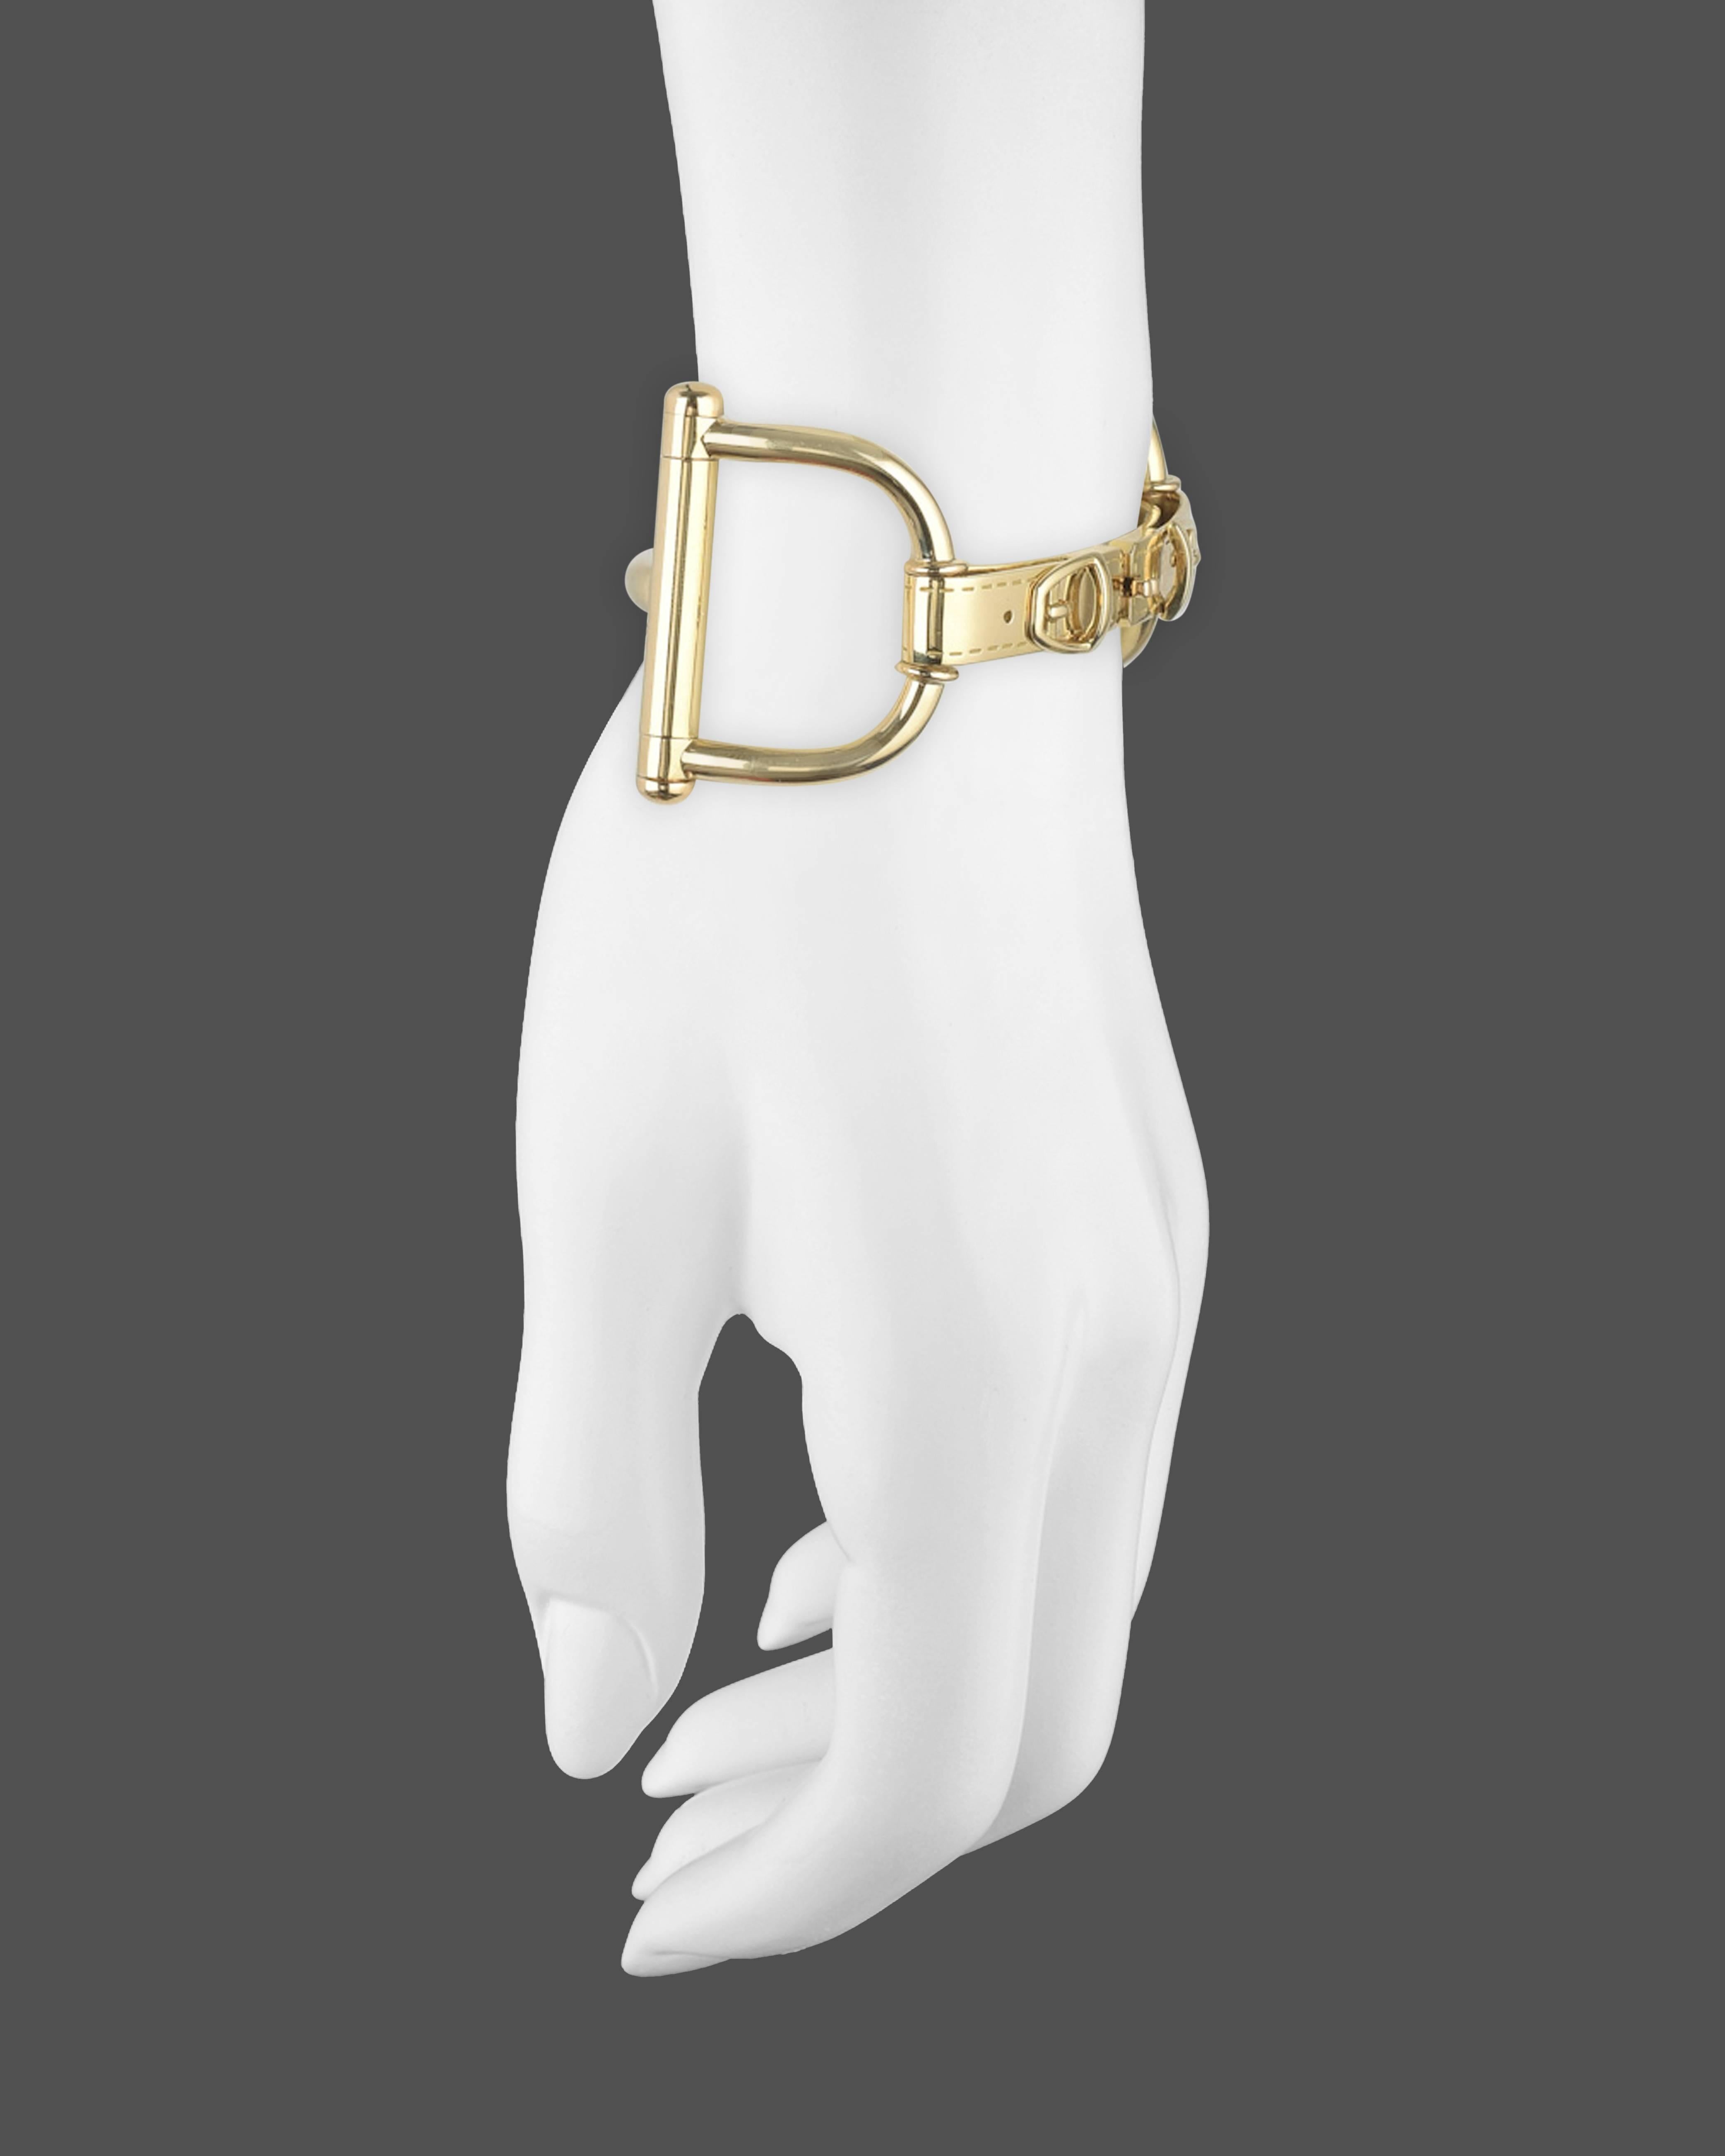 Stirrup and buckle motif link bracelet, in high-polished 18k yellow gold, signed Gucci. Size 16. 7" approximate length and 74.6 grams.
